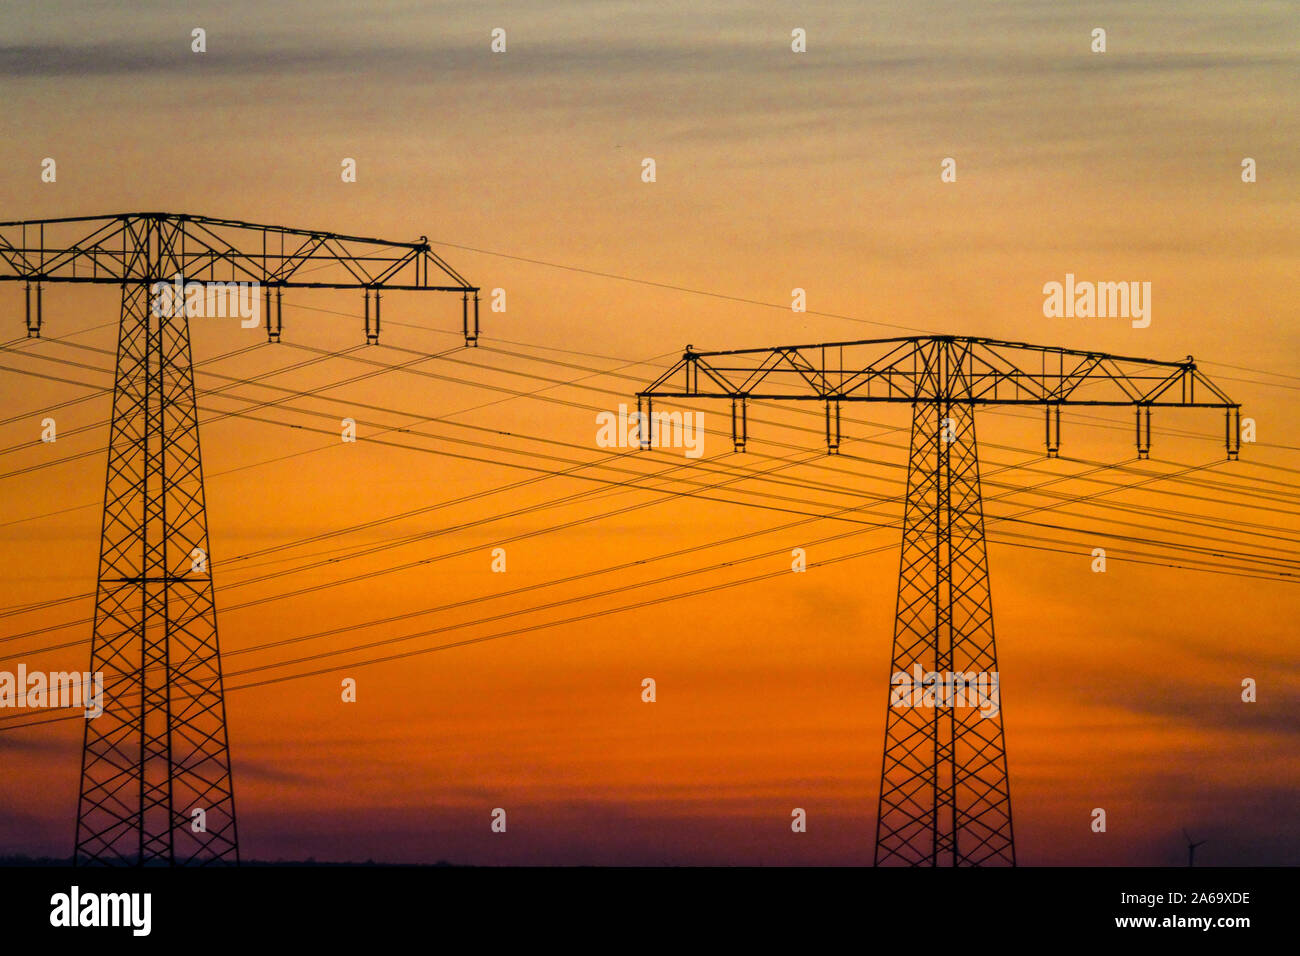 High voltage power line in Sunset Pylons transmission line Germany energy Stock Photo